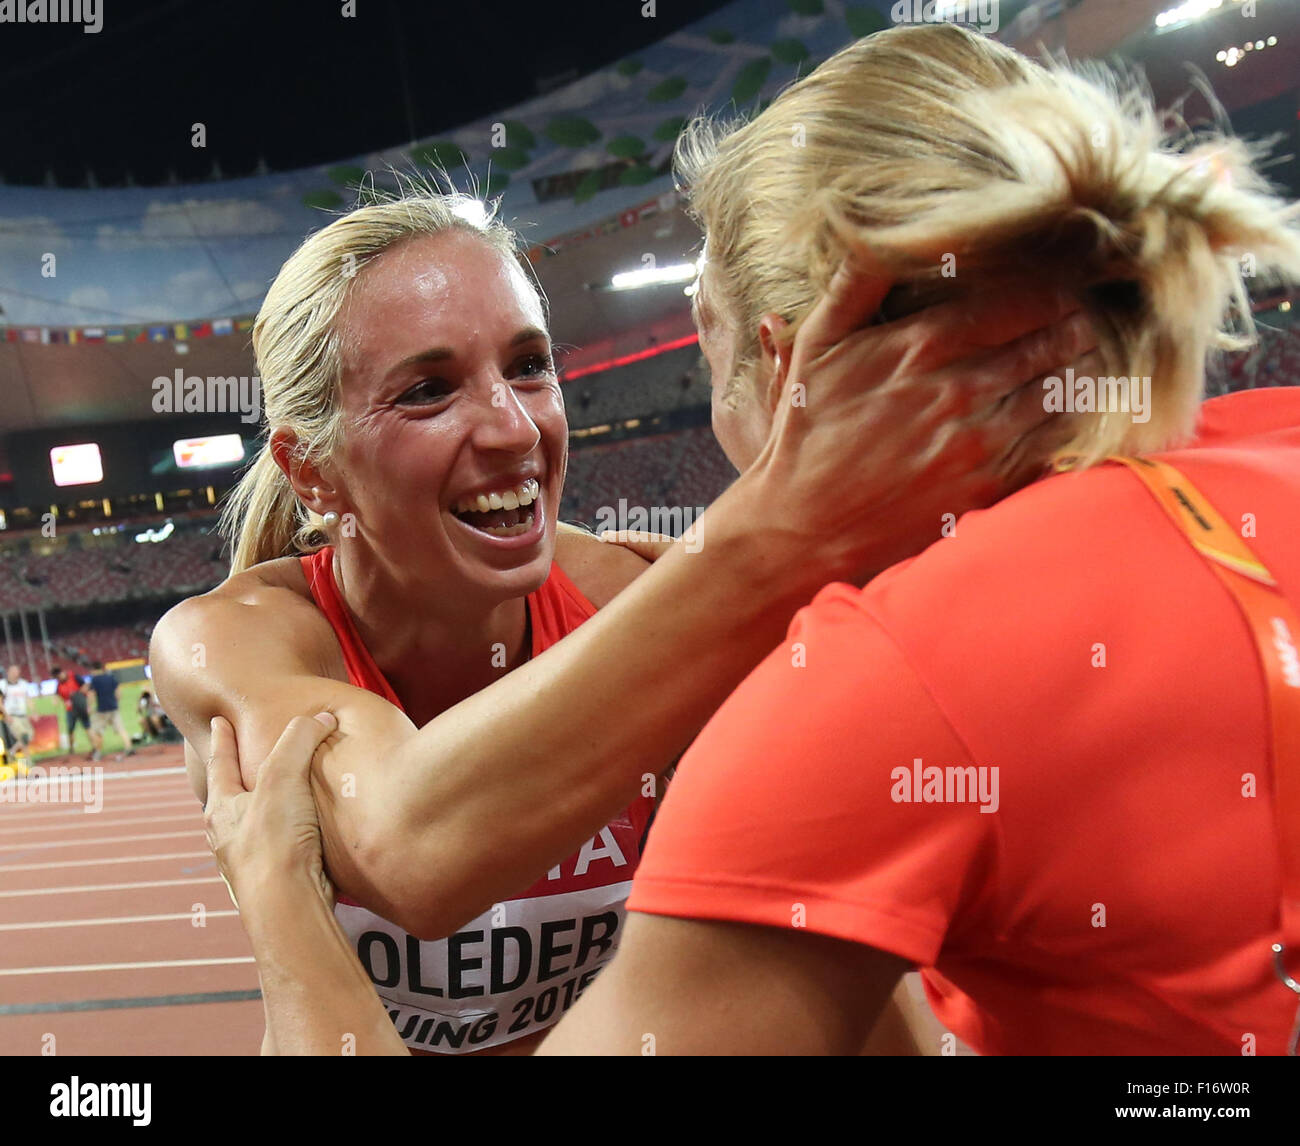 Beijing, China. 28th Aug, 2015. Cindy Roleder of Germany celebrates with German heptathlete Jennifer Oeser (R) after winning the silver medal in the women's 100m Hurdles final at the Beijing 2015 IAAF World Championships at the National Stadium, also known as Bird's Nest, in Beijing, China, 28 August 2015. Photo: Christian Charisius/dpa/Alamy Live News Stock Photo